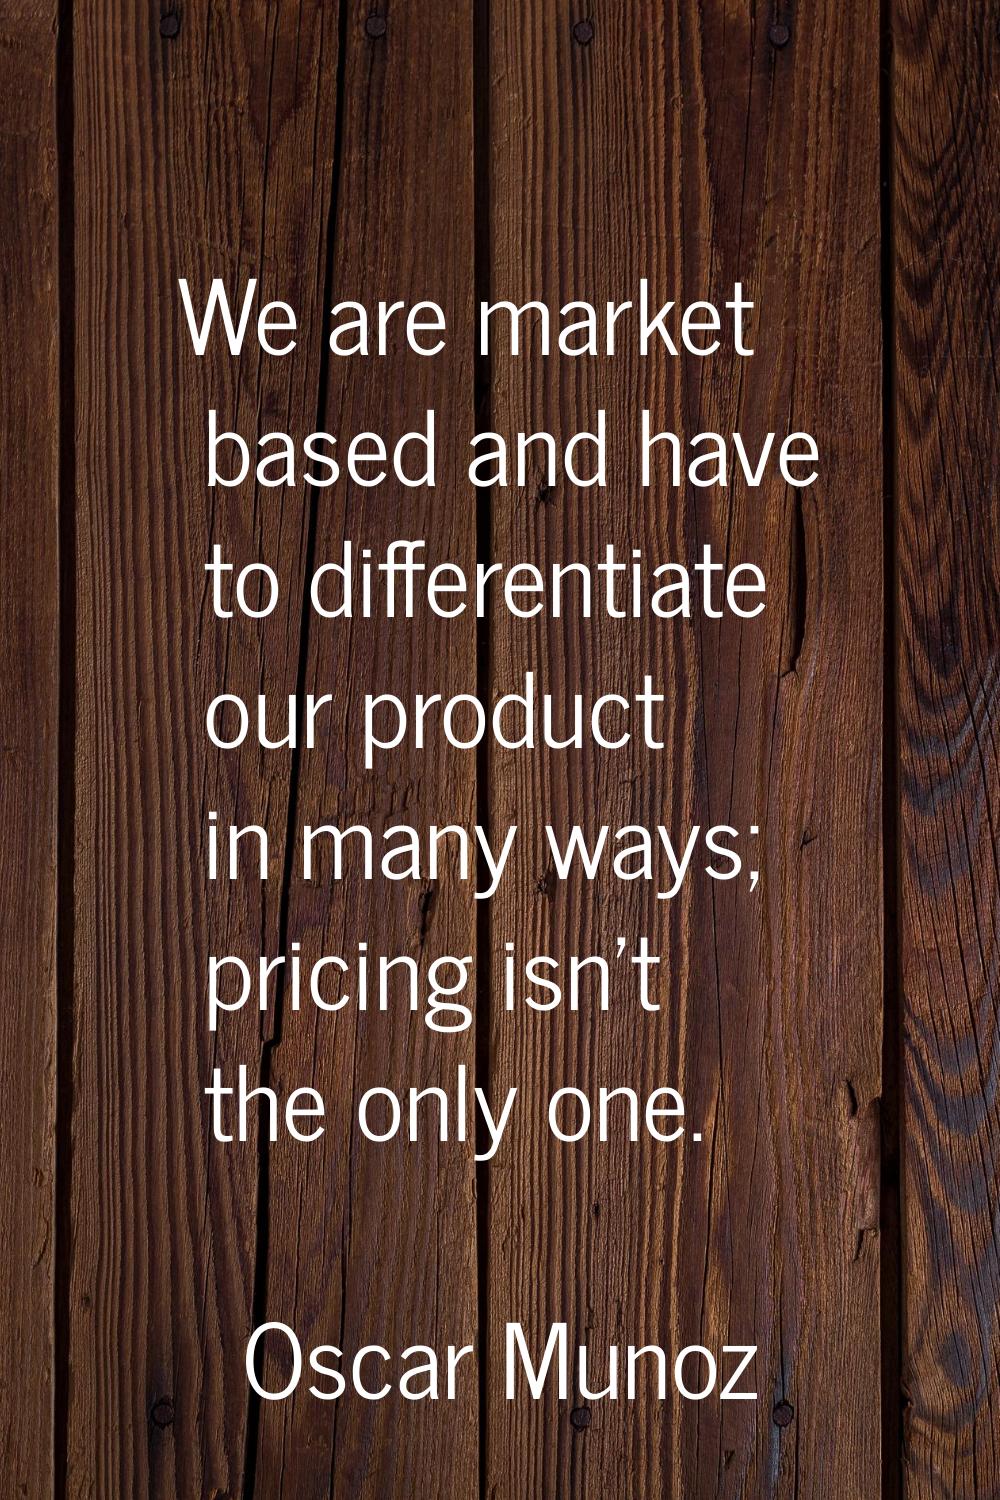 We are market based and have to differentiate our product in many ways; pricing isn't the only one.